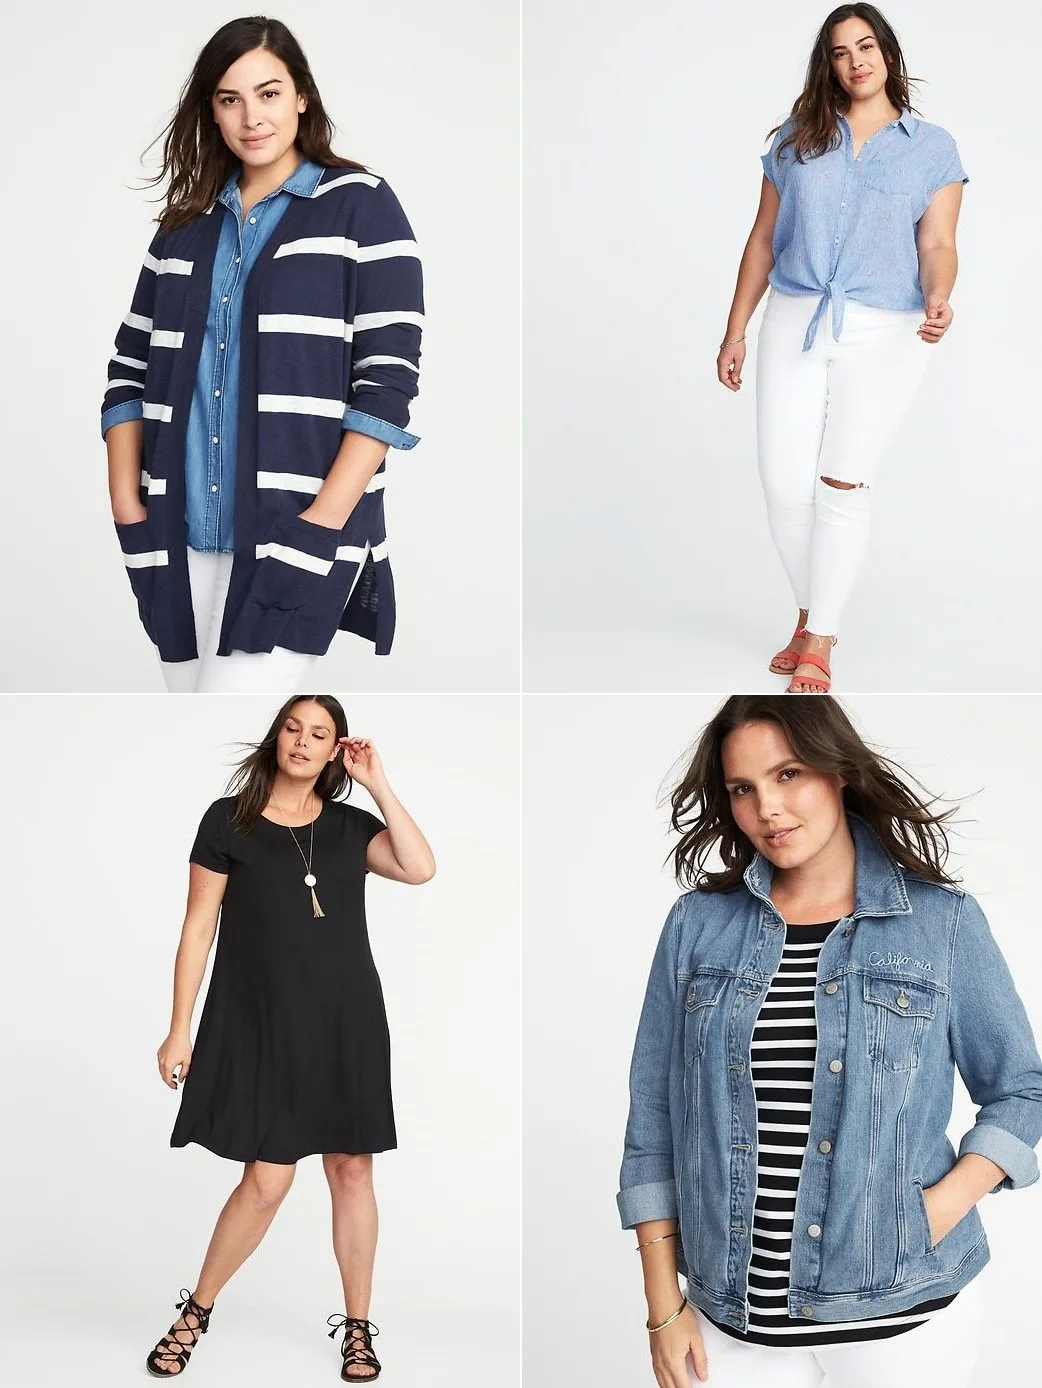 Where to shop for stylish and trendy plus size clothing - click through for all @cydconverse's favorite places to shop!